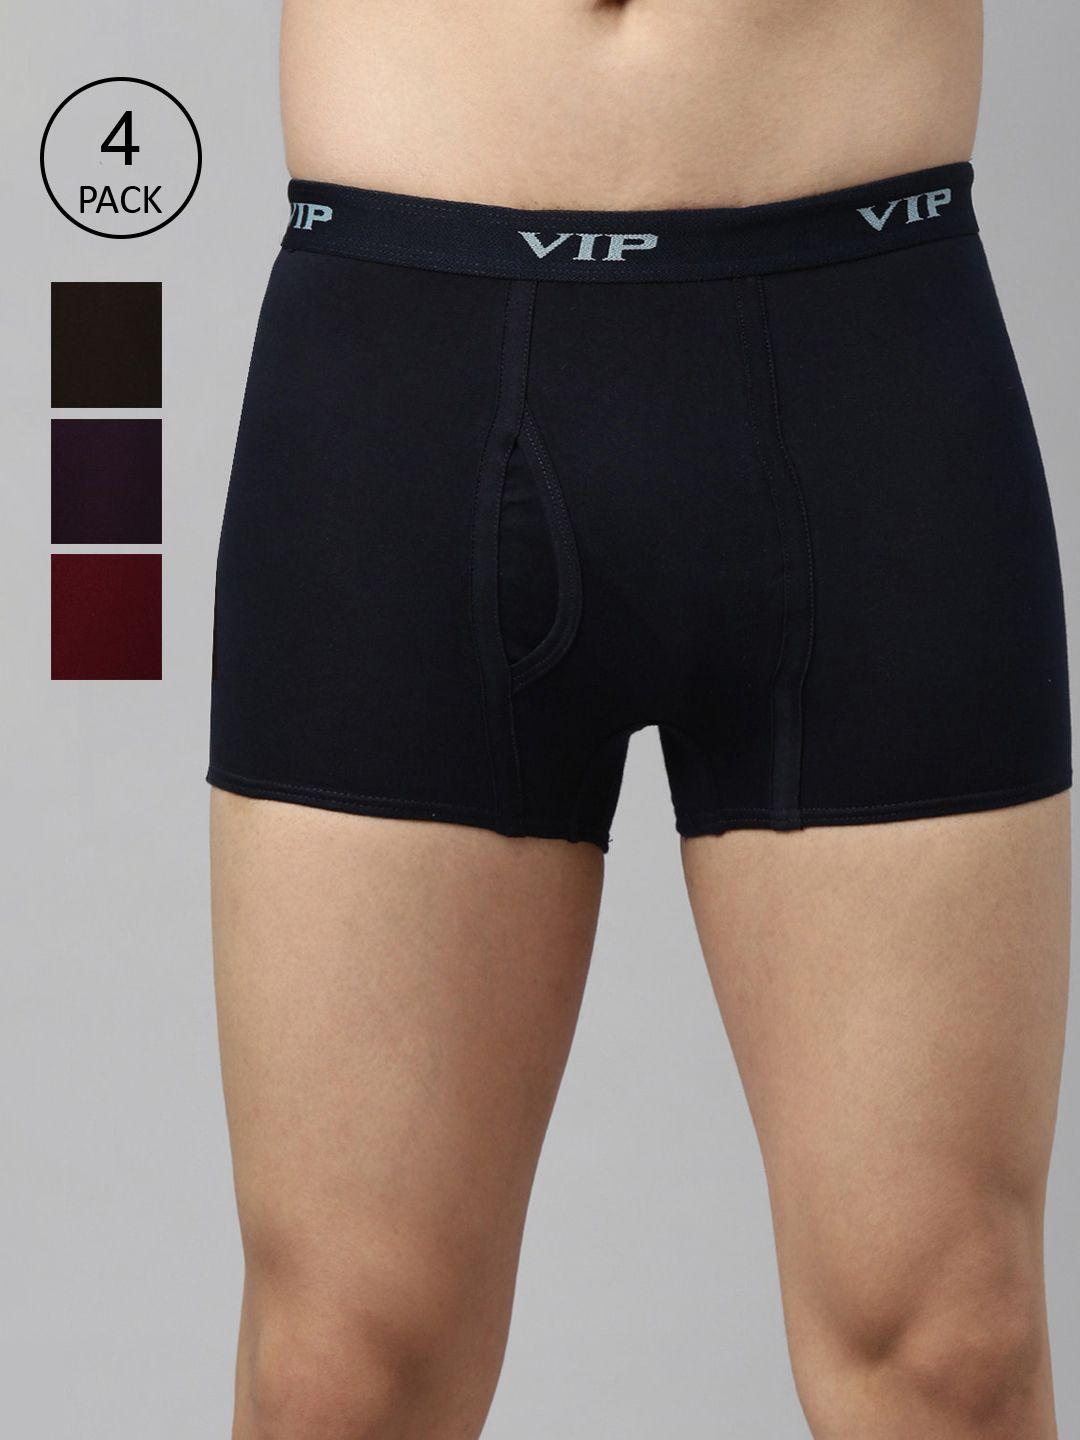 vip men pack of 4 assorted pure cotton long trunks punchpo4_95